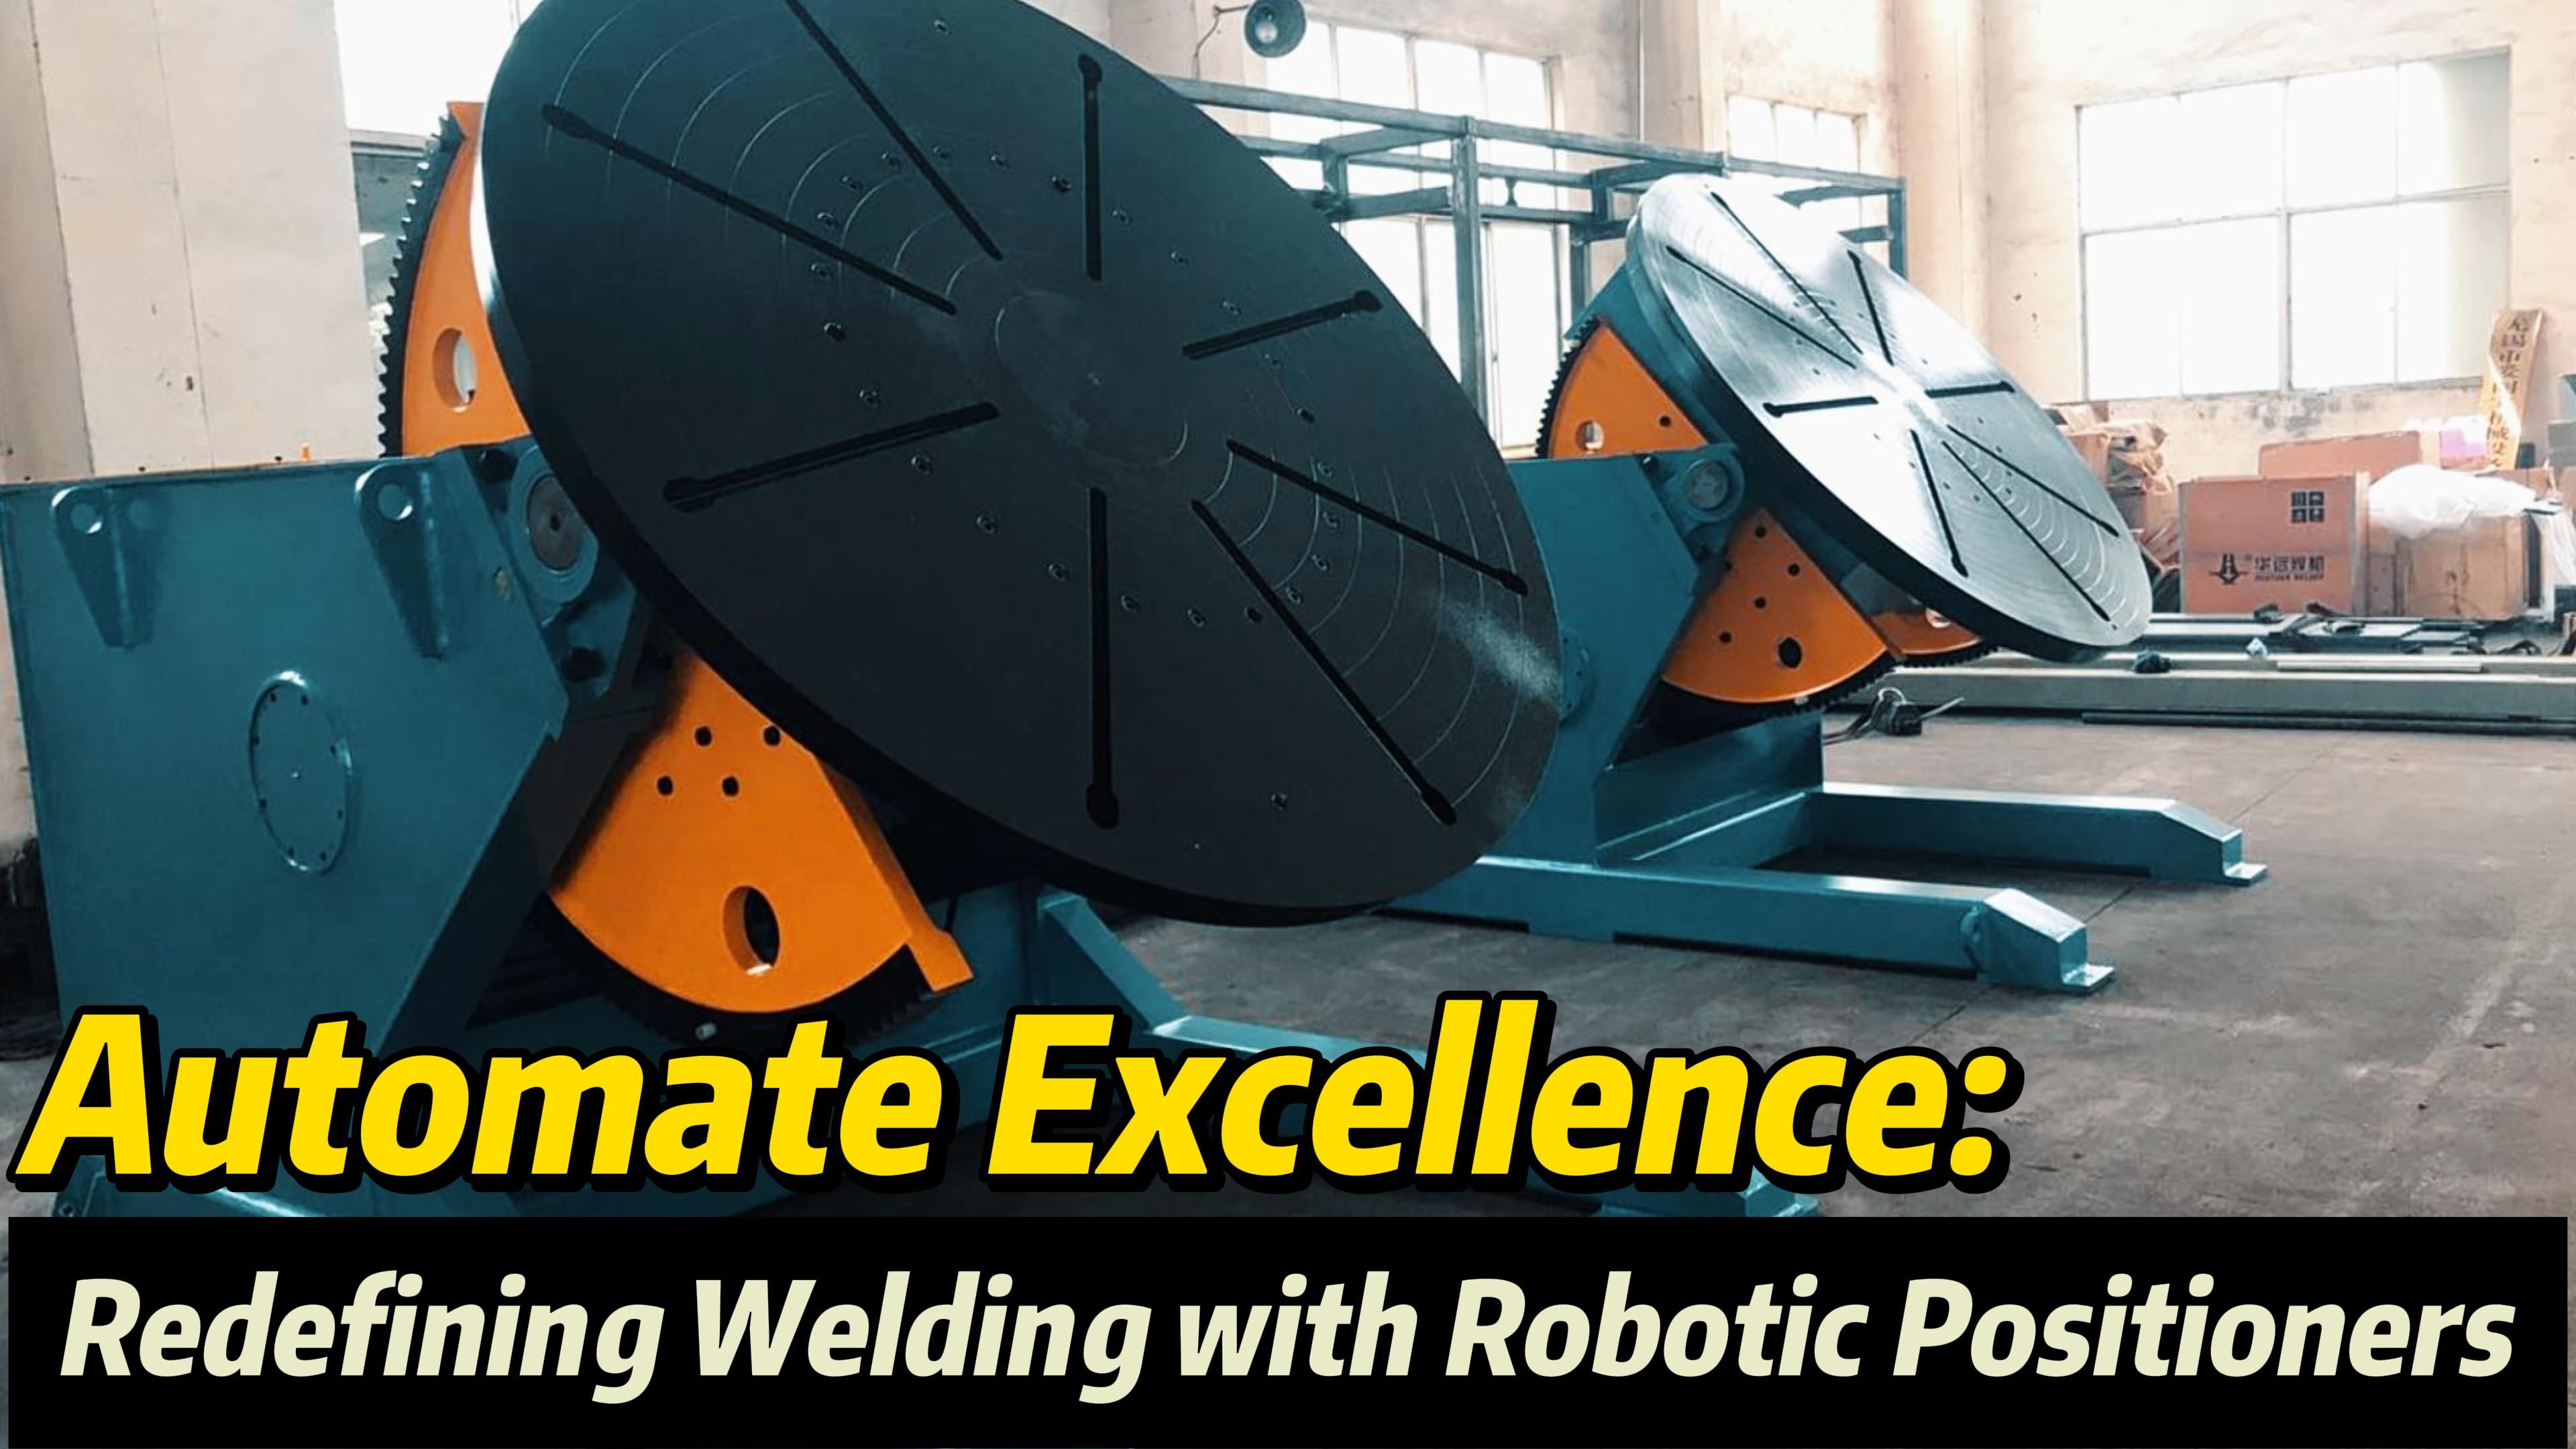 Mastering Precision: Enhance Your Welding Skills with the Power of Positioners